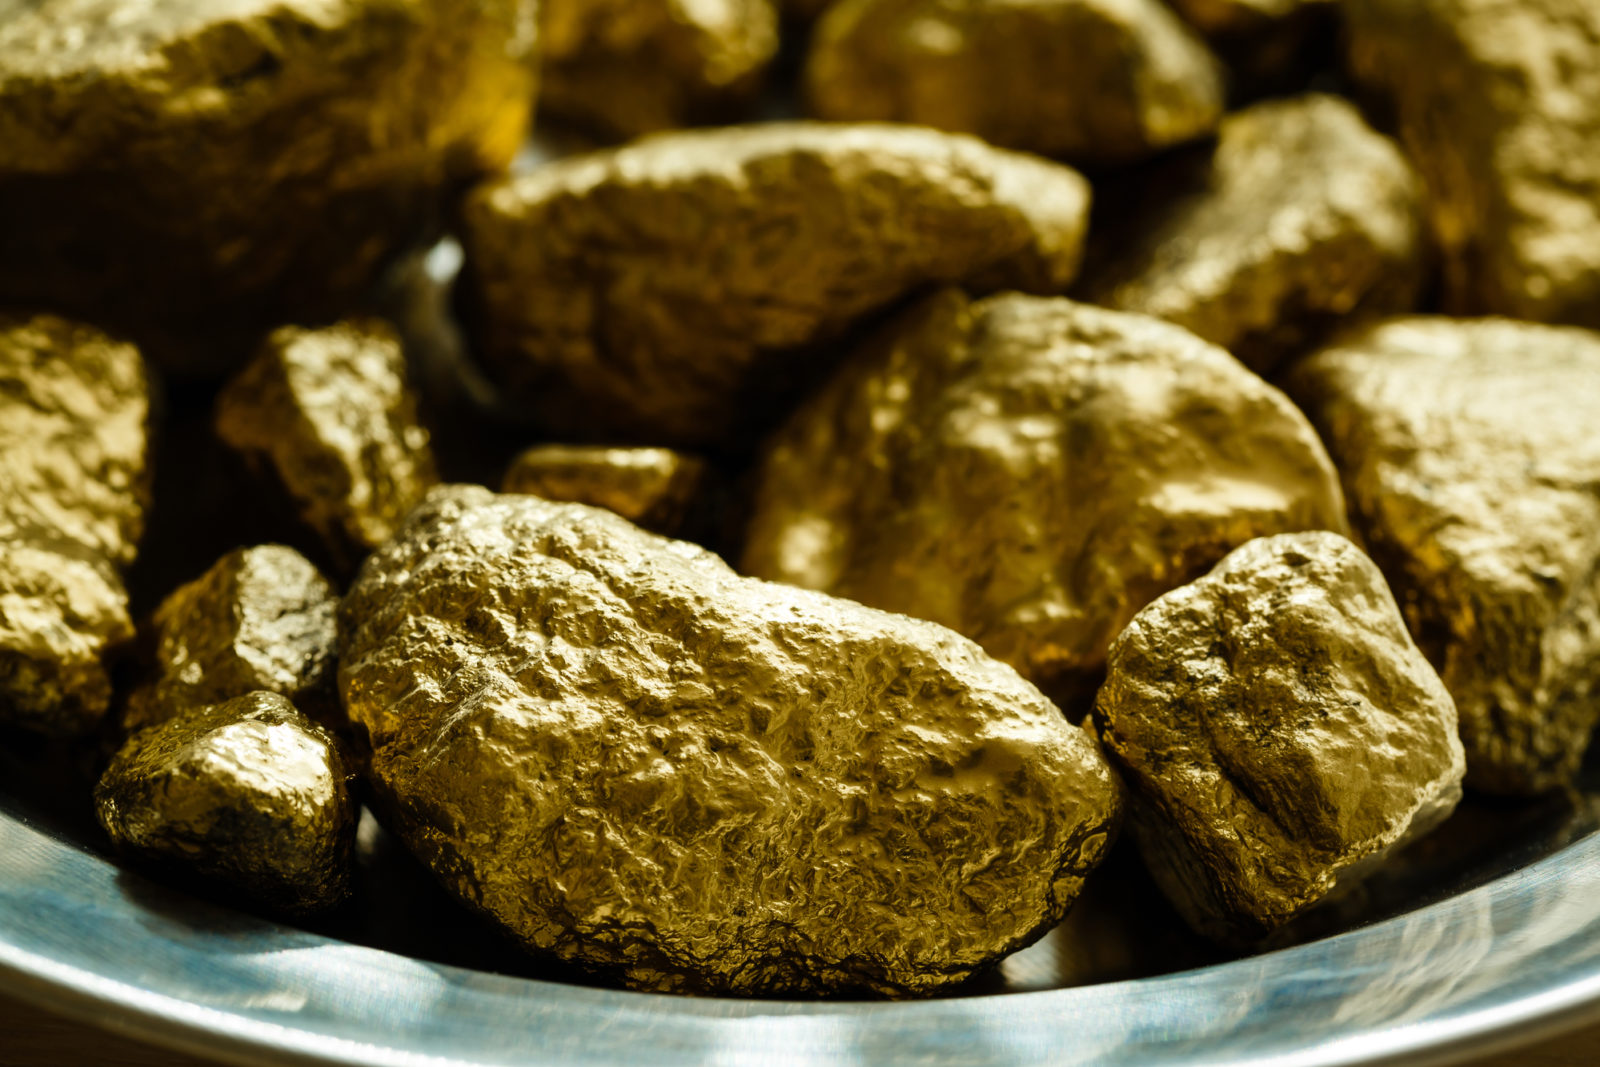 Gold Rush Gold nuggets